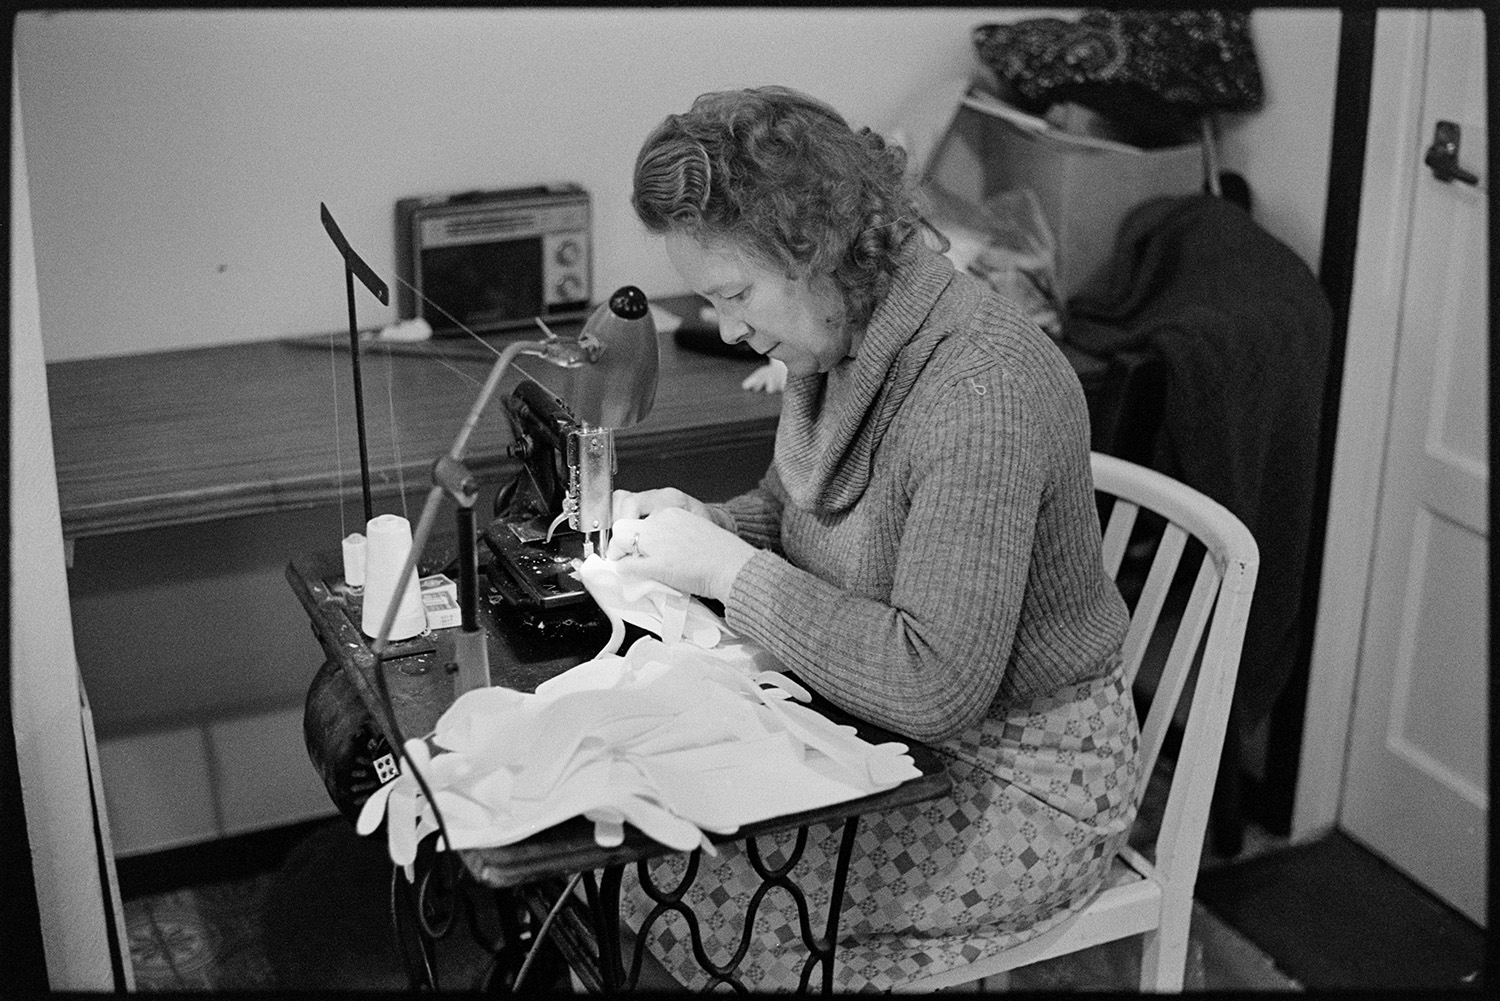 Woman out-worker making gloves at home. 
[Mrs Thacker making sat at a sewing machine making gloves for Vaughans Glove Factory in her home in Torrington.]